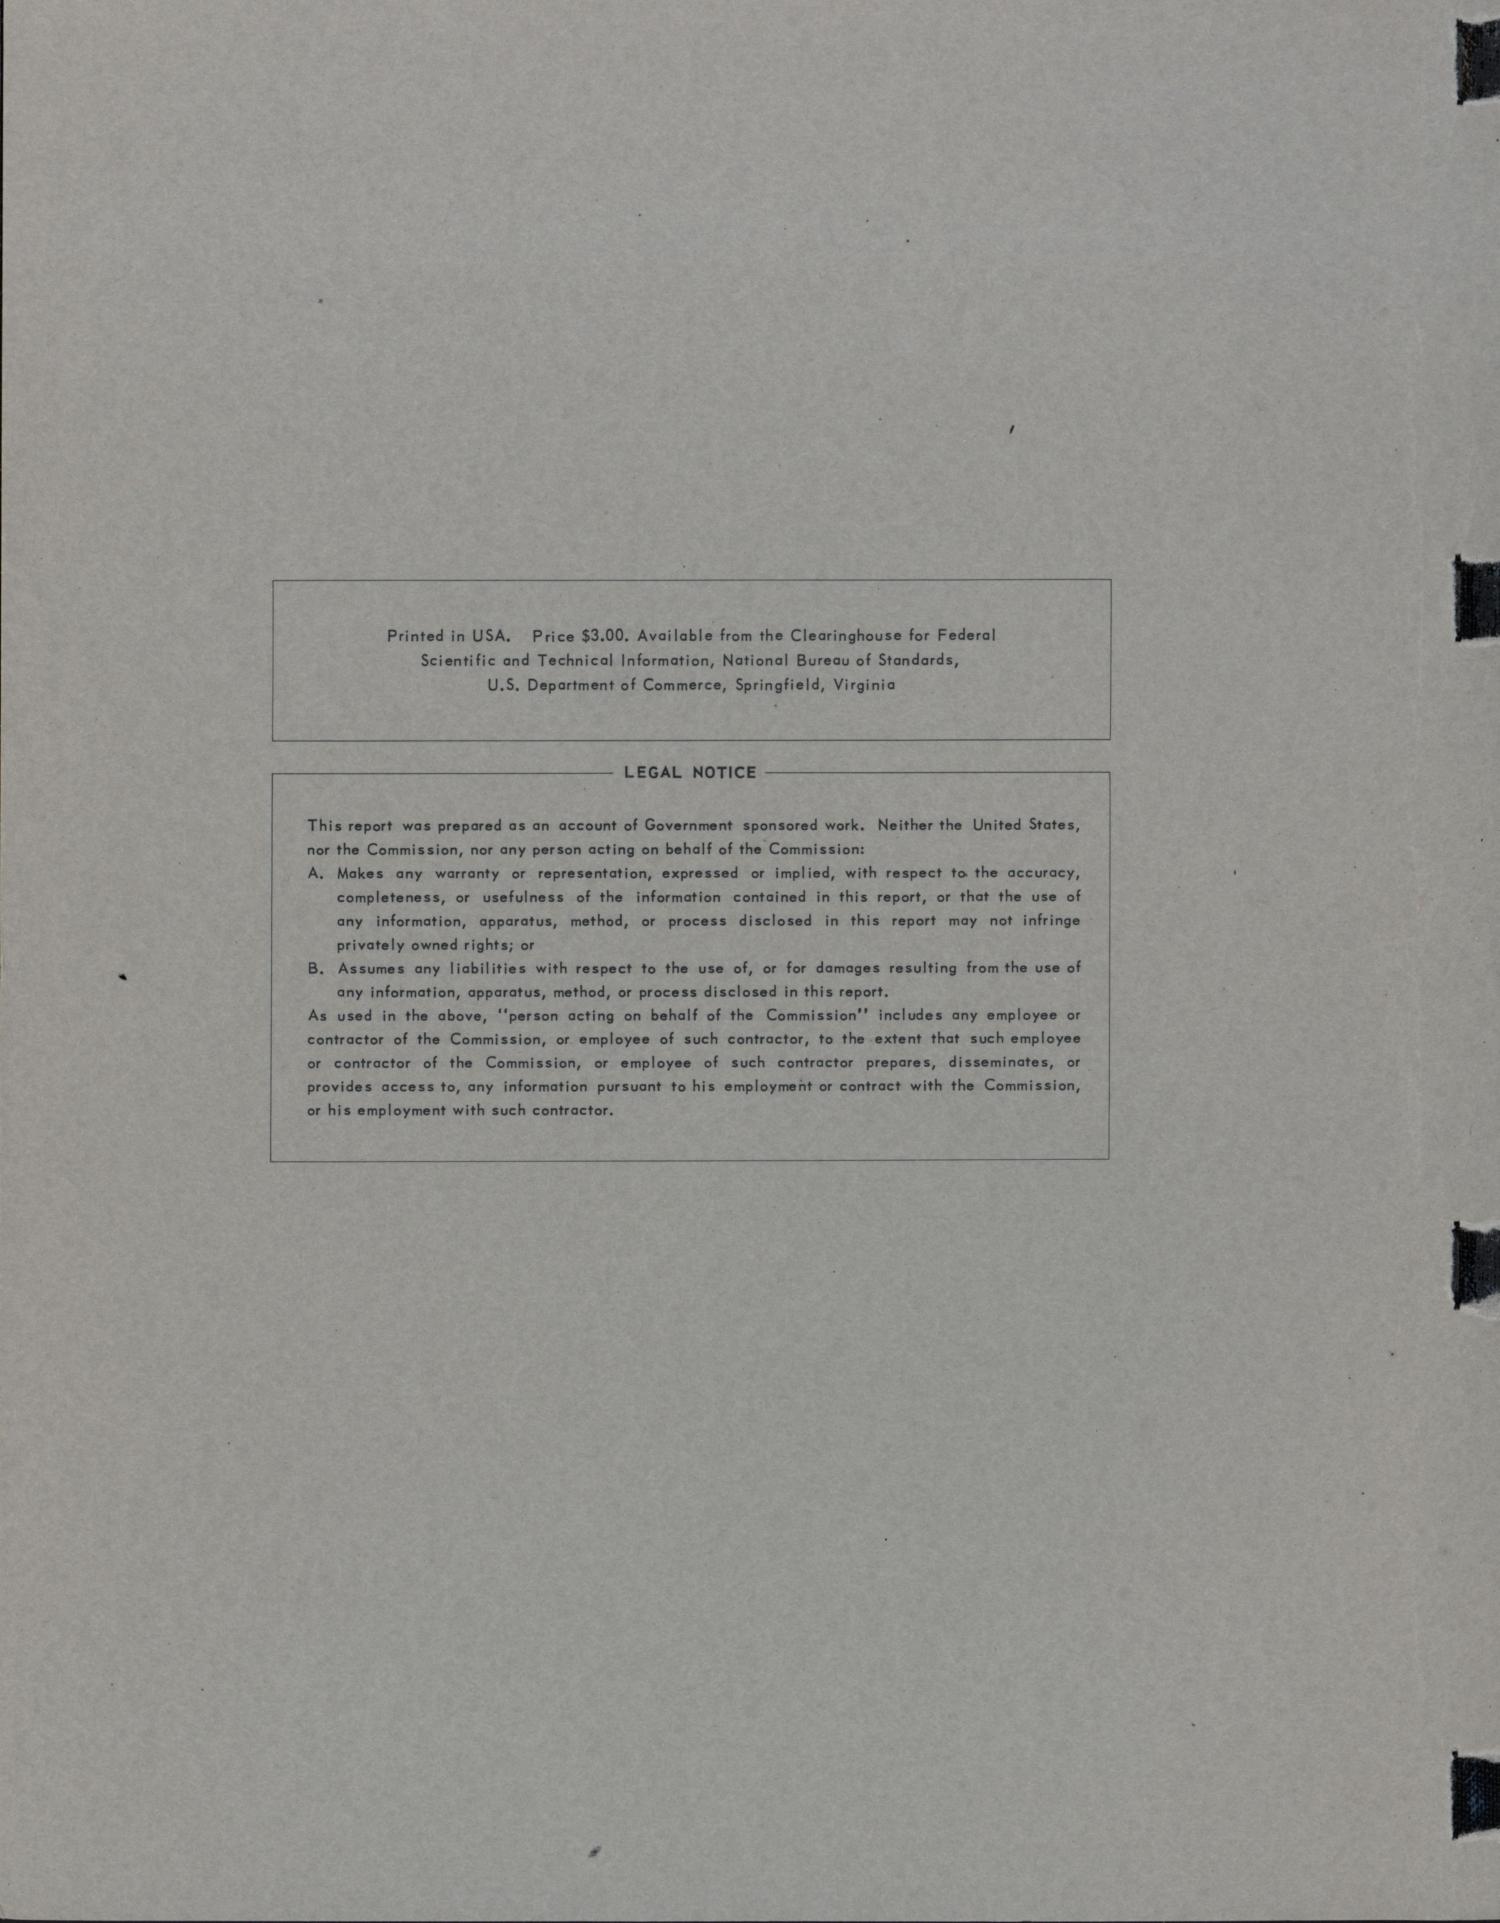 Solid State Division Annual Progress Report, May 31, 1964
                                                
                                                    Front Inside
                                                